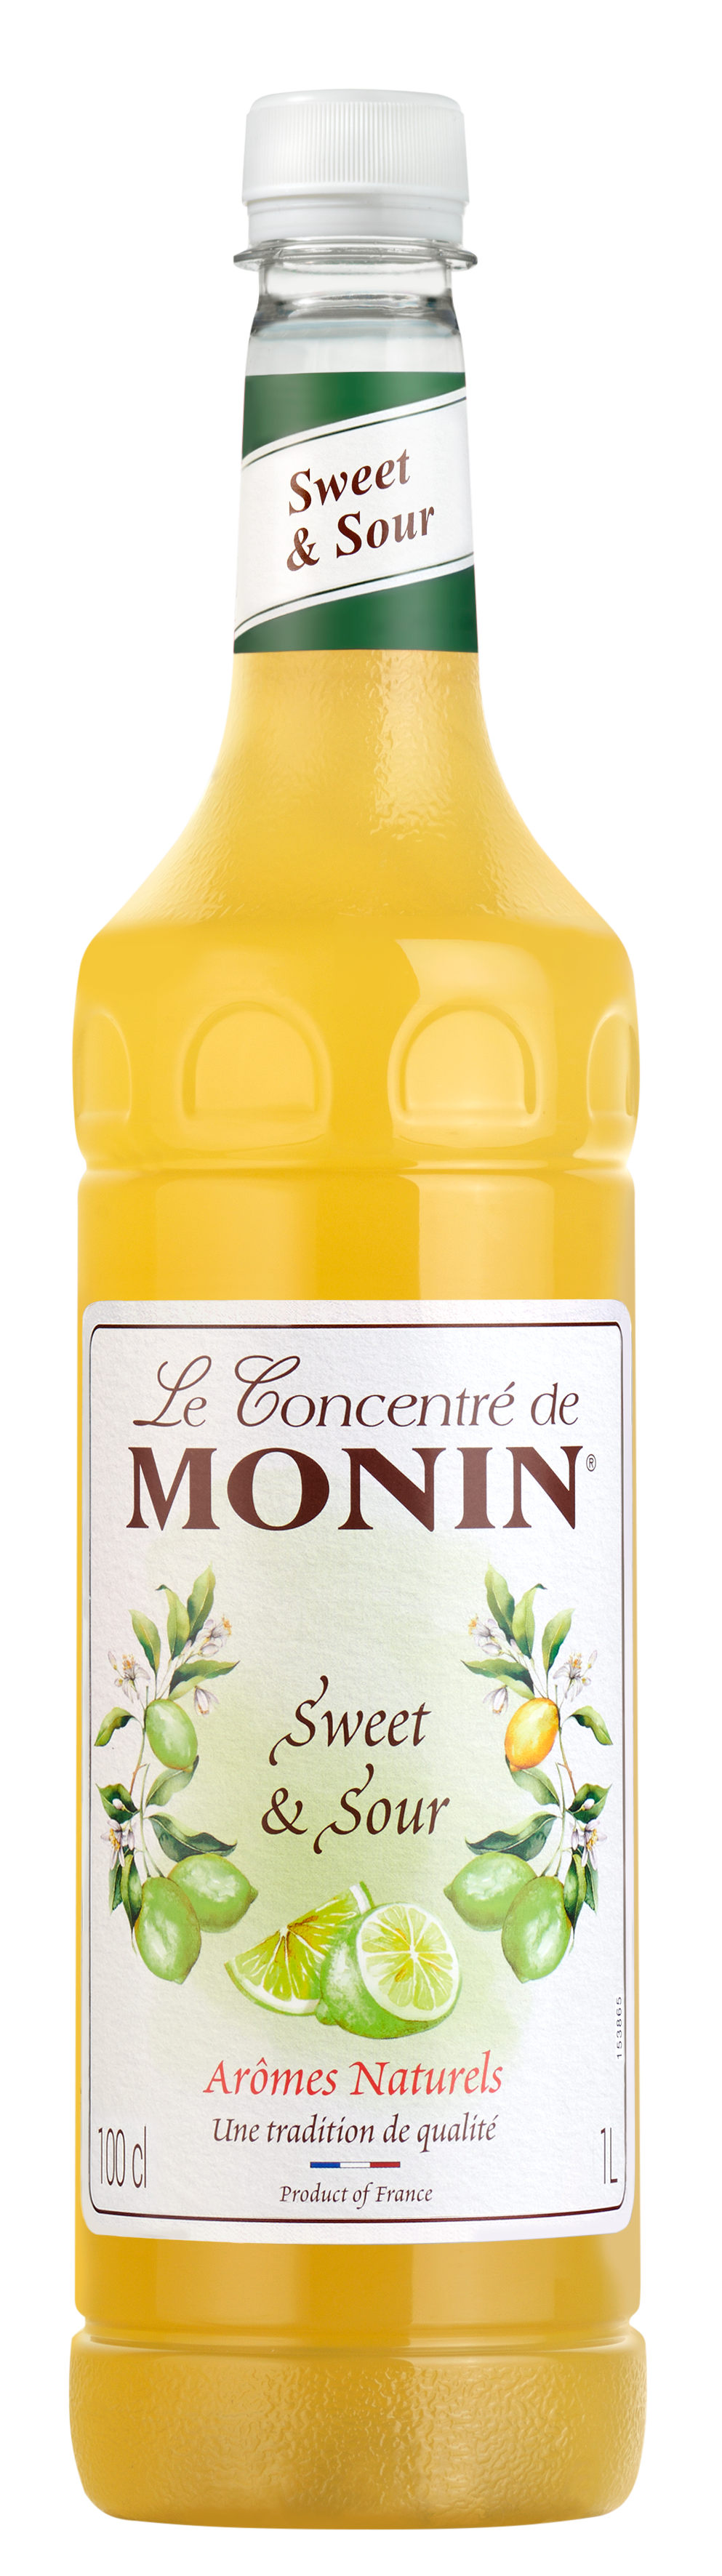 MONIN Sweet and Sour Concentrare 1L